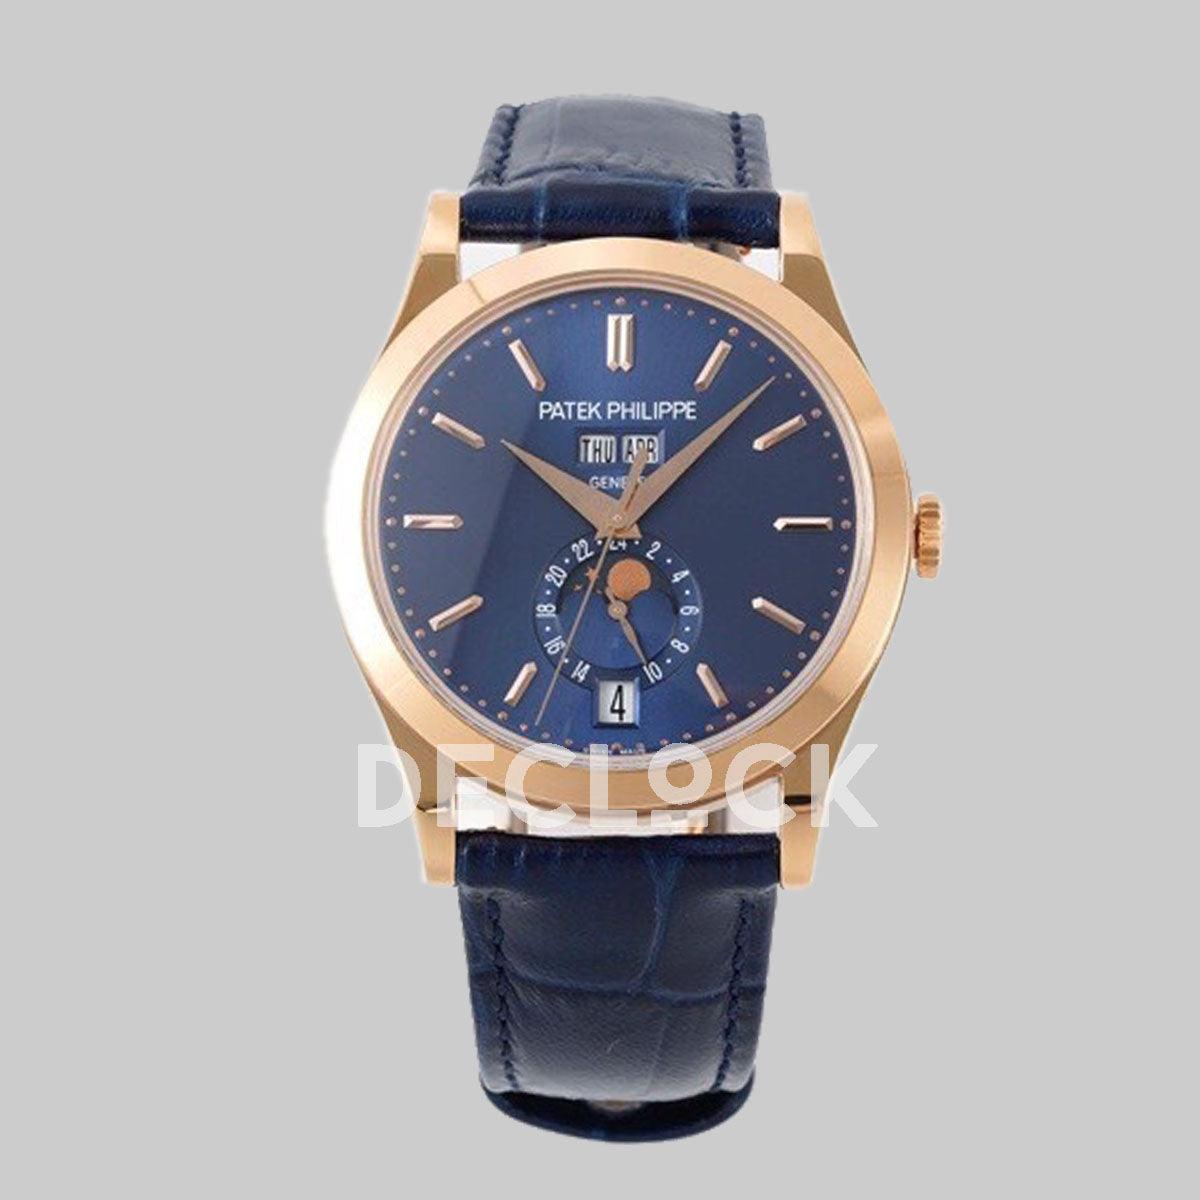 Replica Pattek Philippe Annual Calendar Moonphase 5396 Blue Dial on Blue Leather Strap - Replica Watches